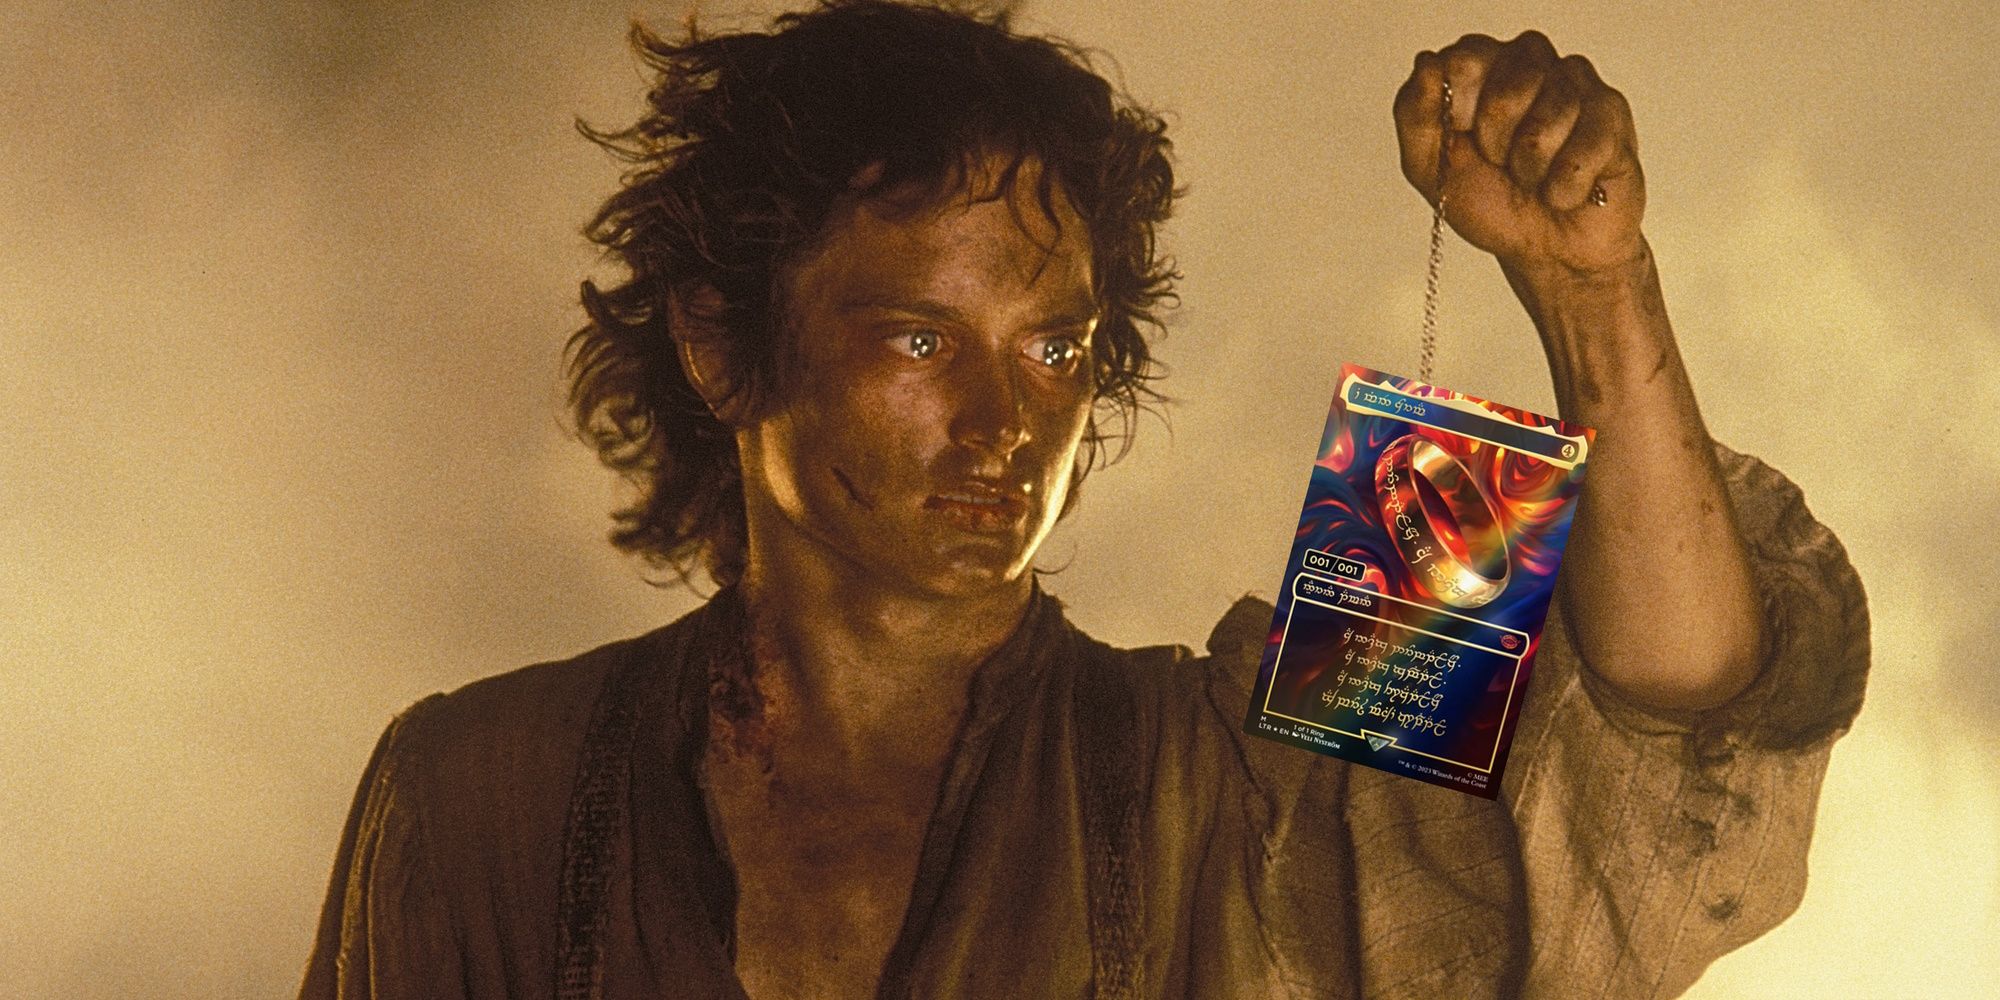 Magic: The Gathering's One Ring Card Bounty Now Up To $1 Million